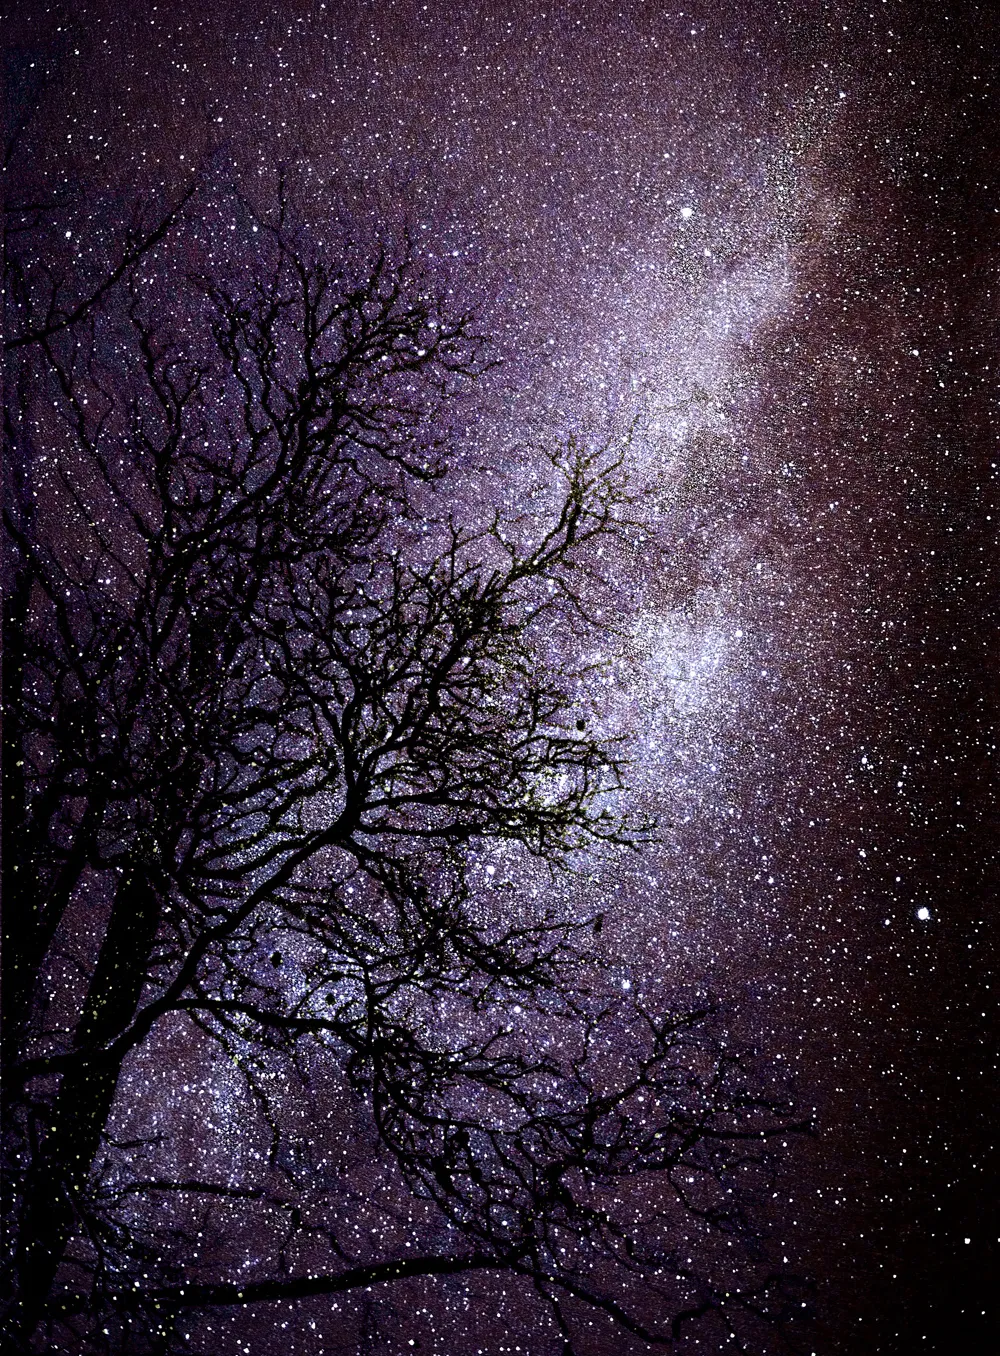 Milkyway against Branches by Mark Casto, Suffolk, UK. Equipment: Lumix G1, Tripod